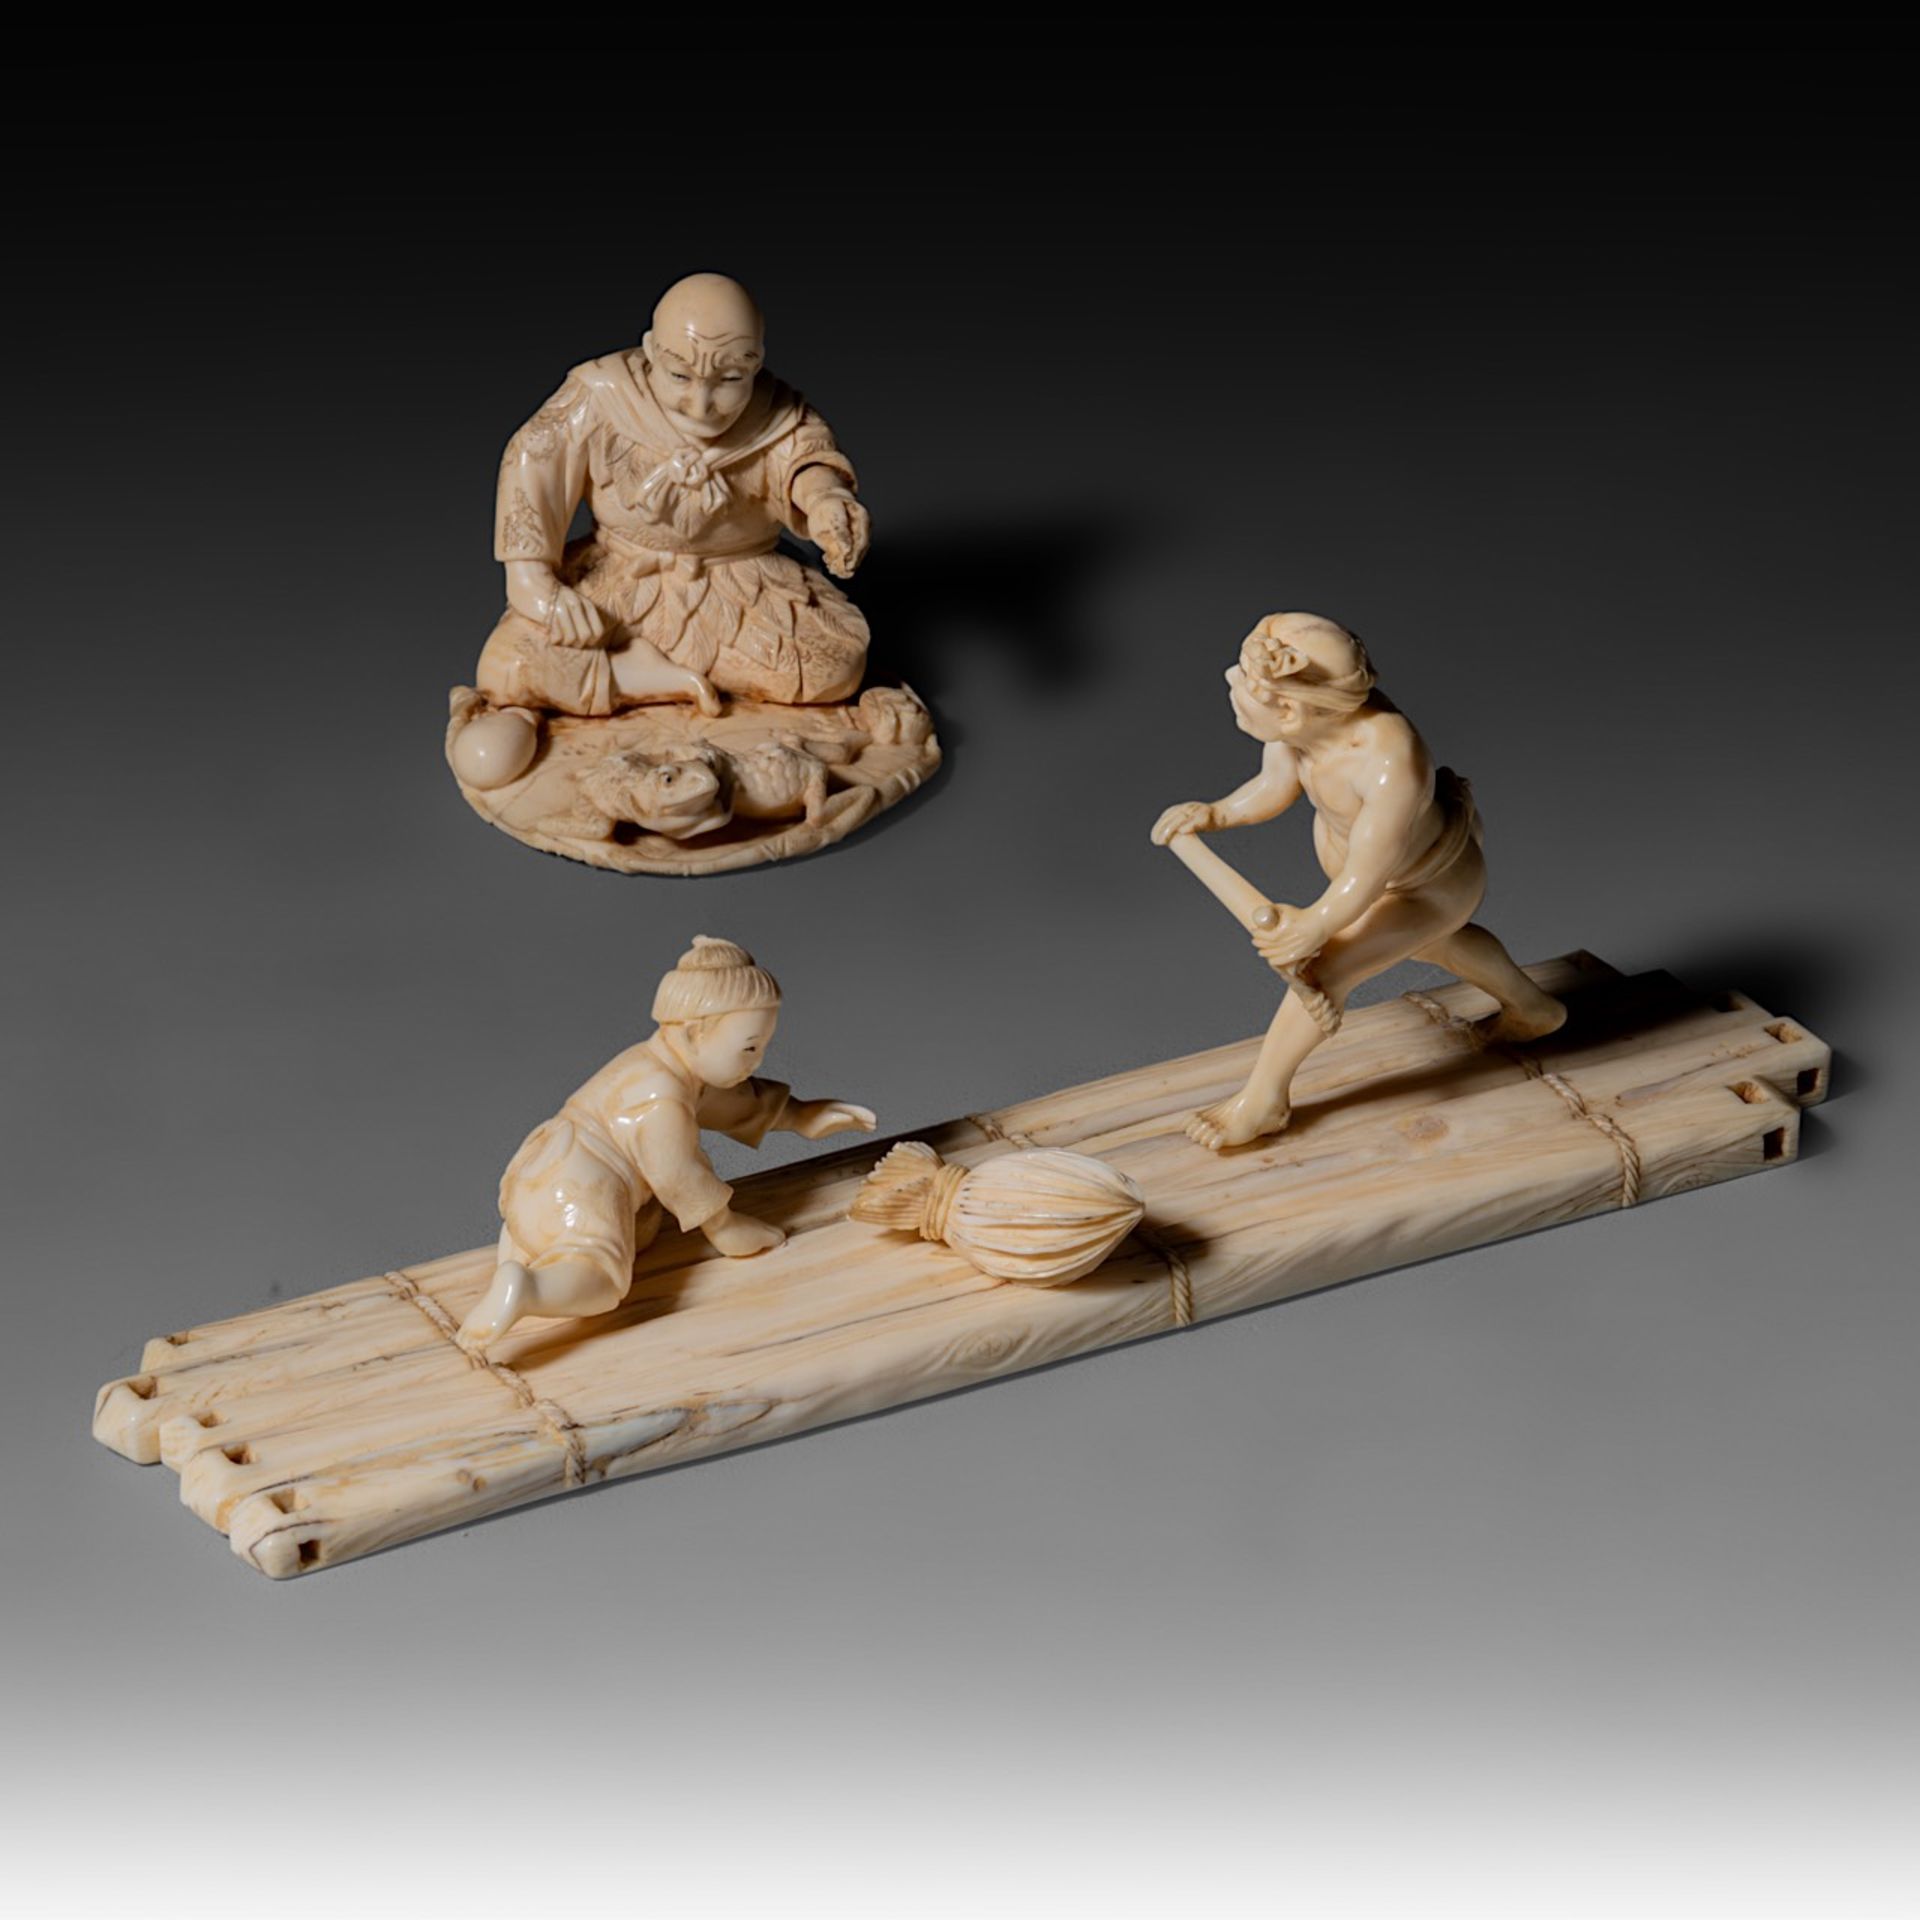 Two Japanese Meiji-period (1868-1912) ivory okimono; one depicts a man rowing a raft while a child s